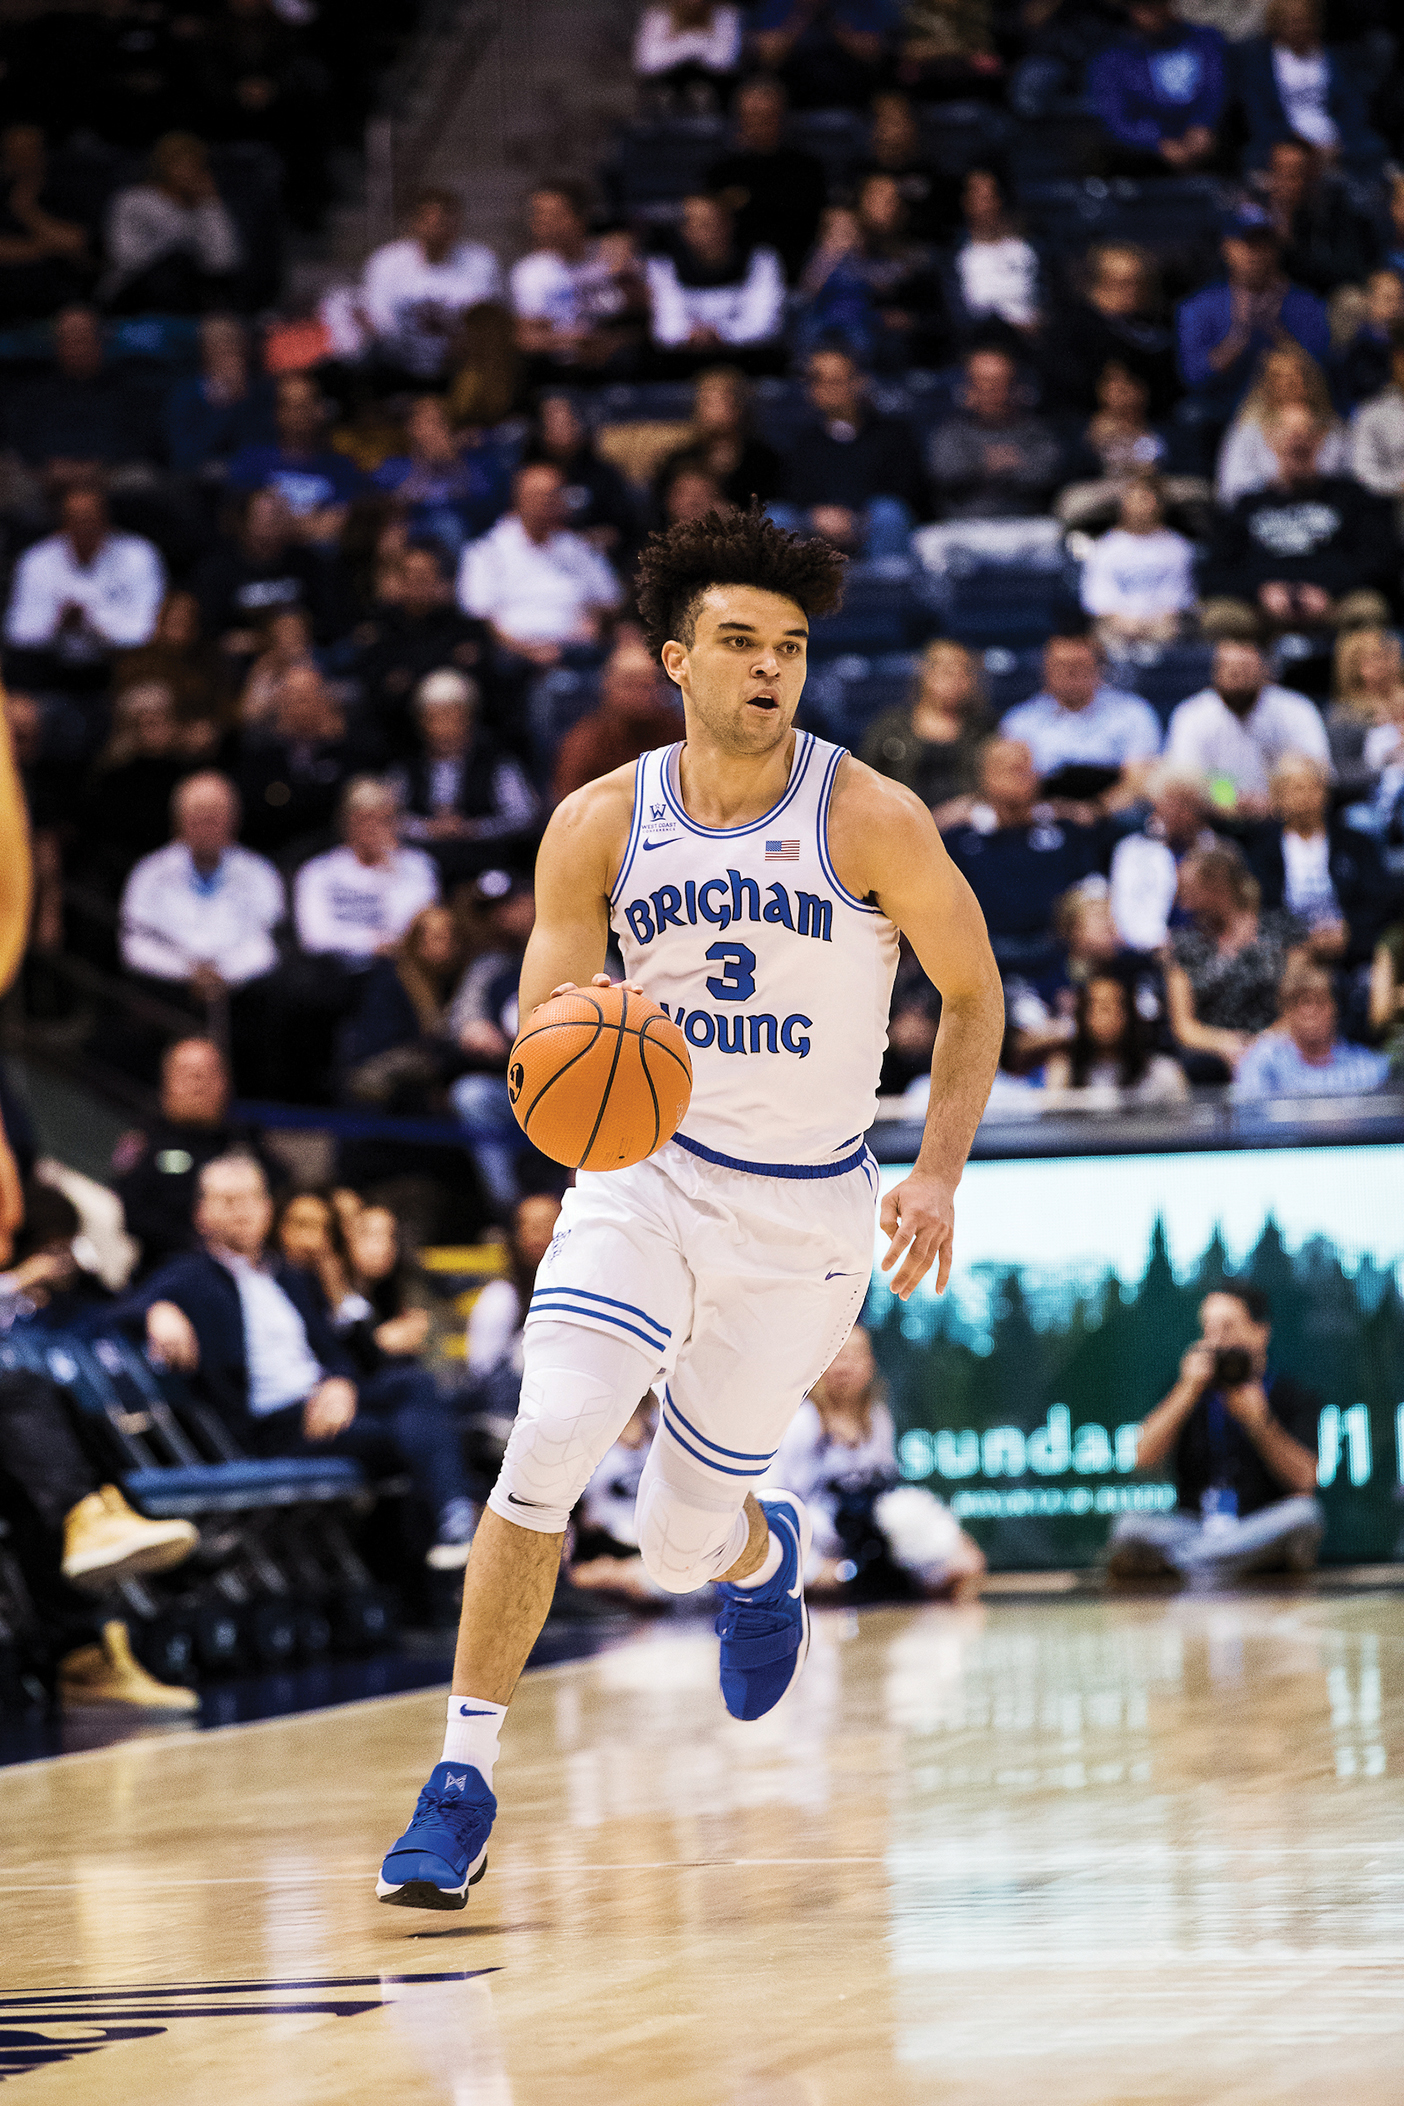 Photo of Elijah Bryant dribbling the basketball in a game.